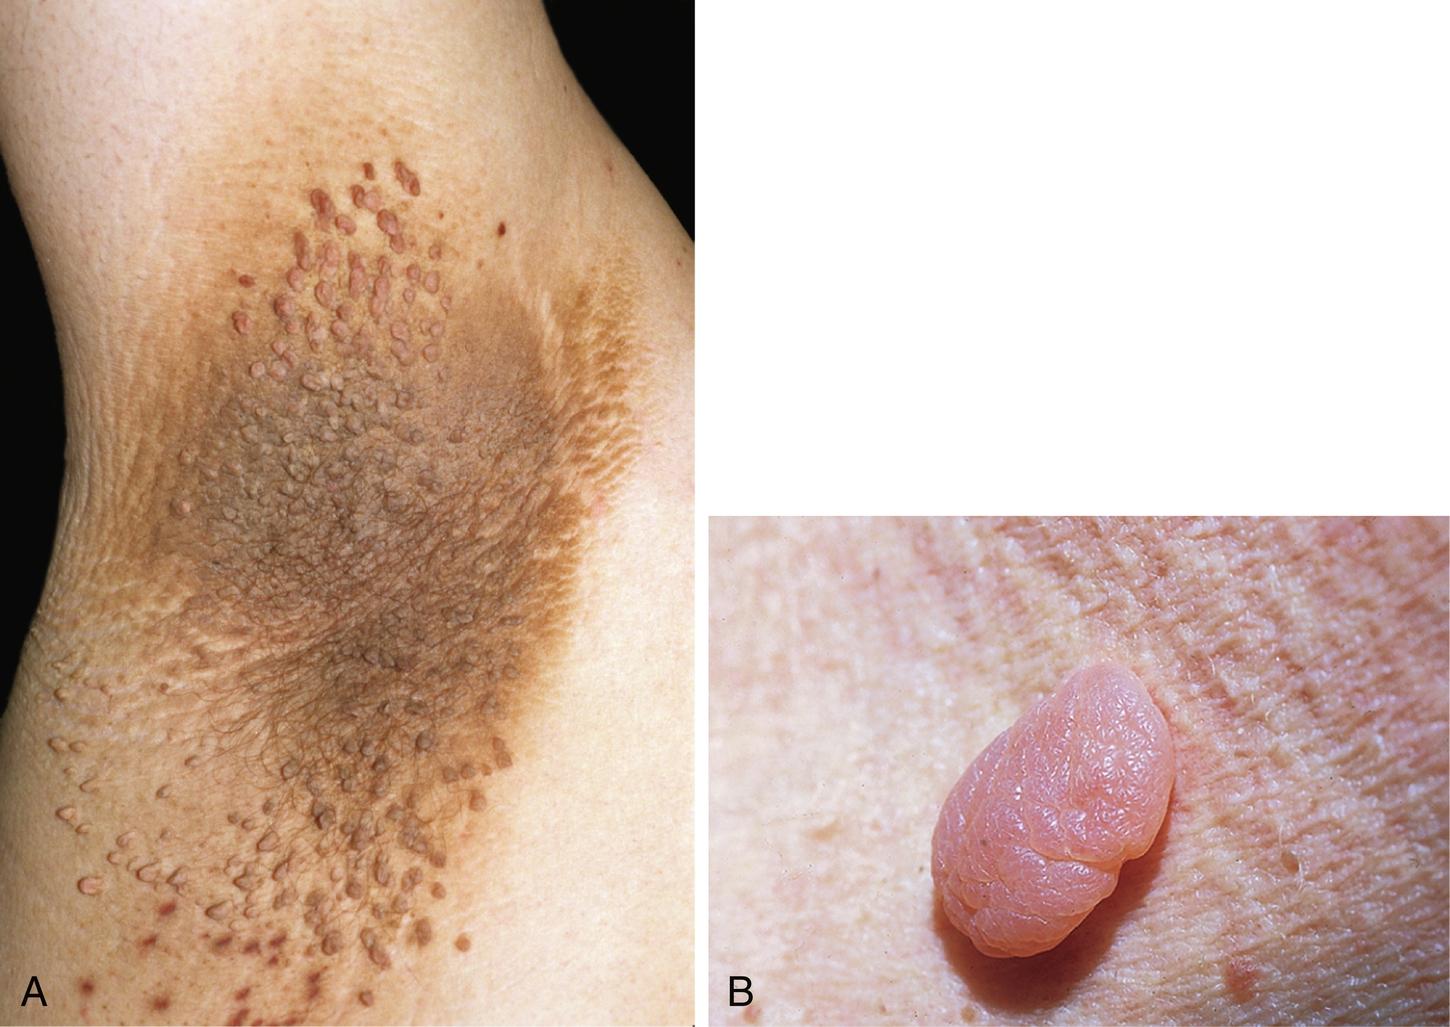 Fig. 42.1, A, Multiple, small, typical exophytic, light brown acrochordons of the axilla associated with acanthosis nigricans. B, Typical acrochordon demonstrating skin-colored, soft, pedunculated papule. Exophytic seborrheic keratoses and nevi may resemble acrochordons.